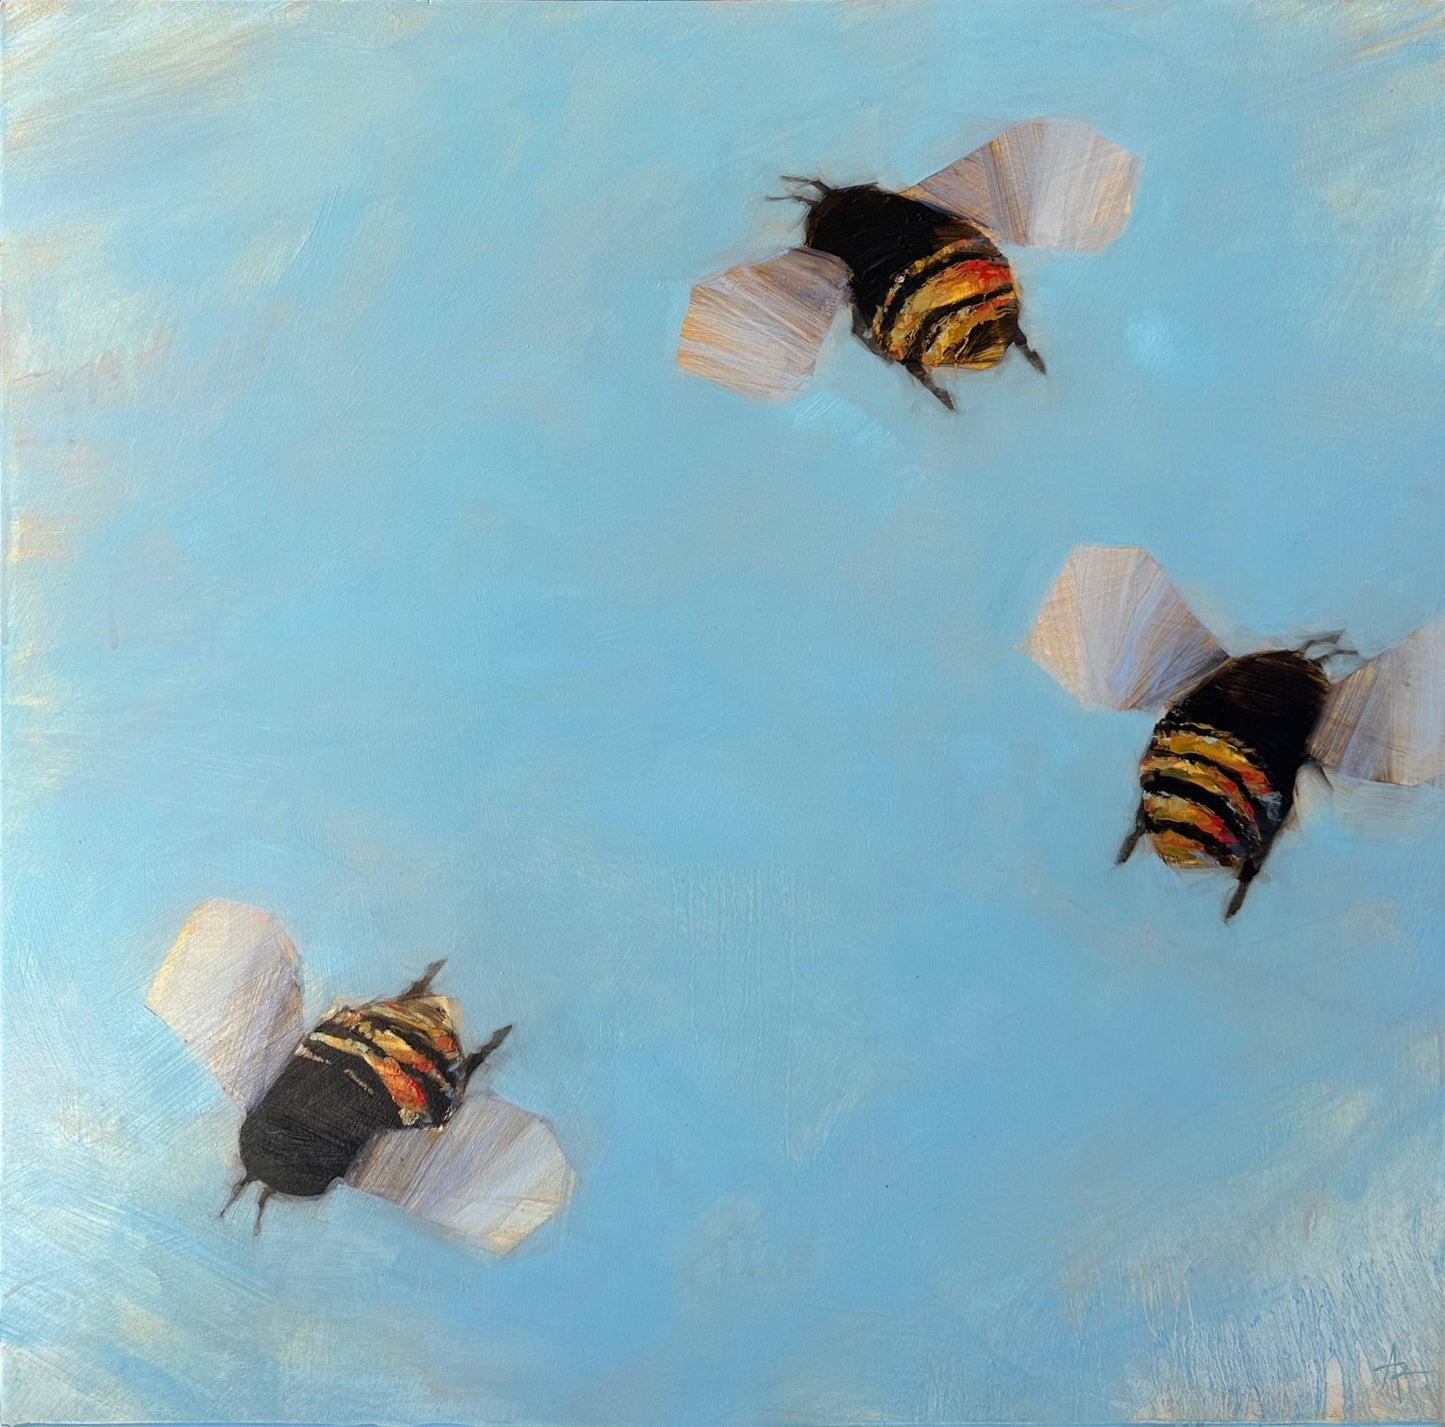 Bees 2-52 by Angie Renfro at LePrince Galleries